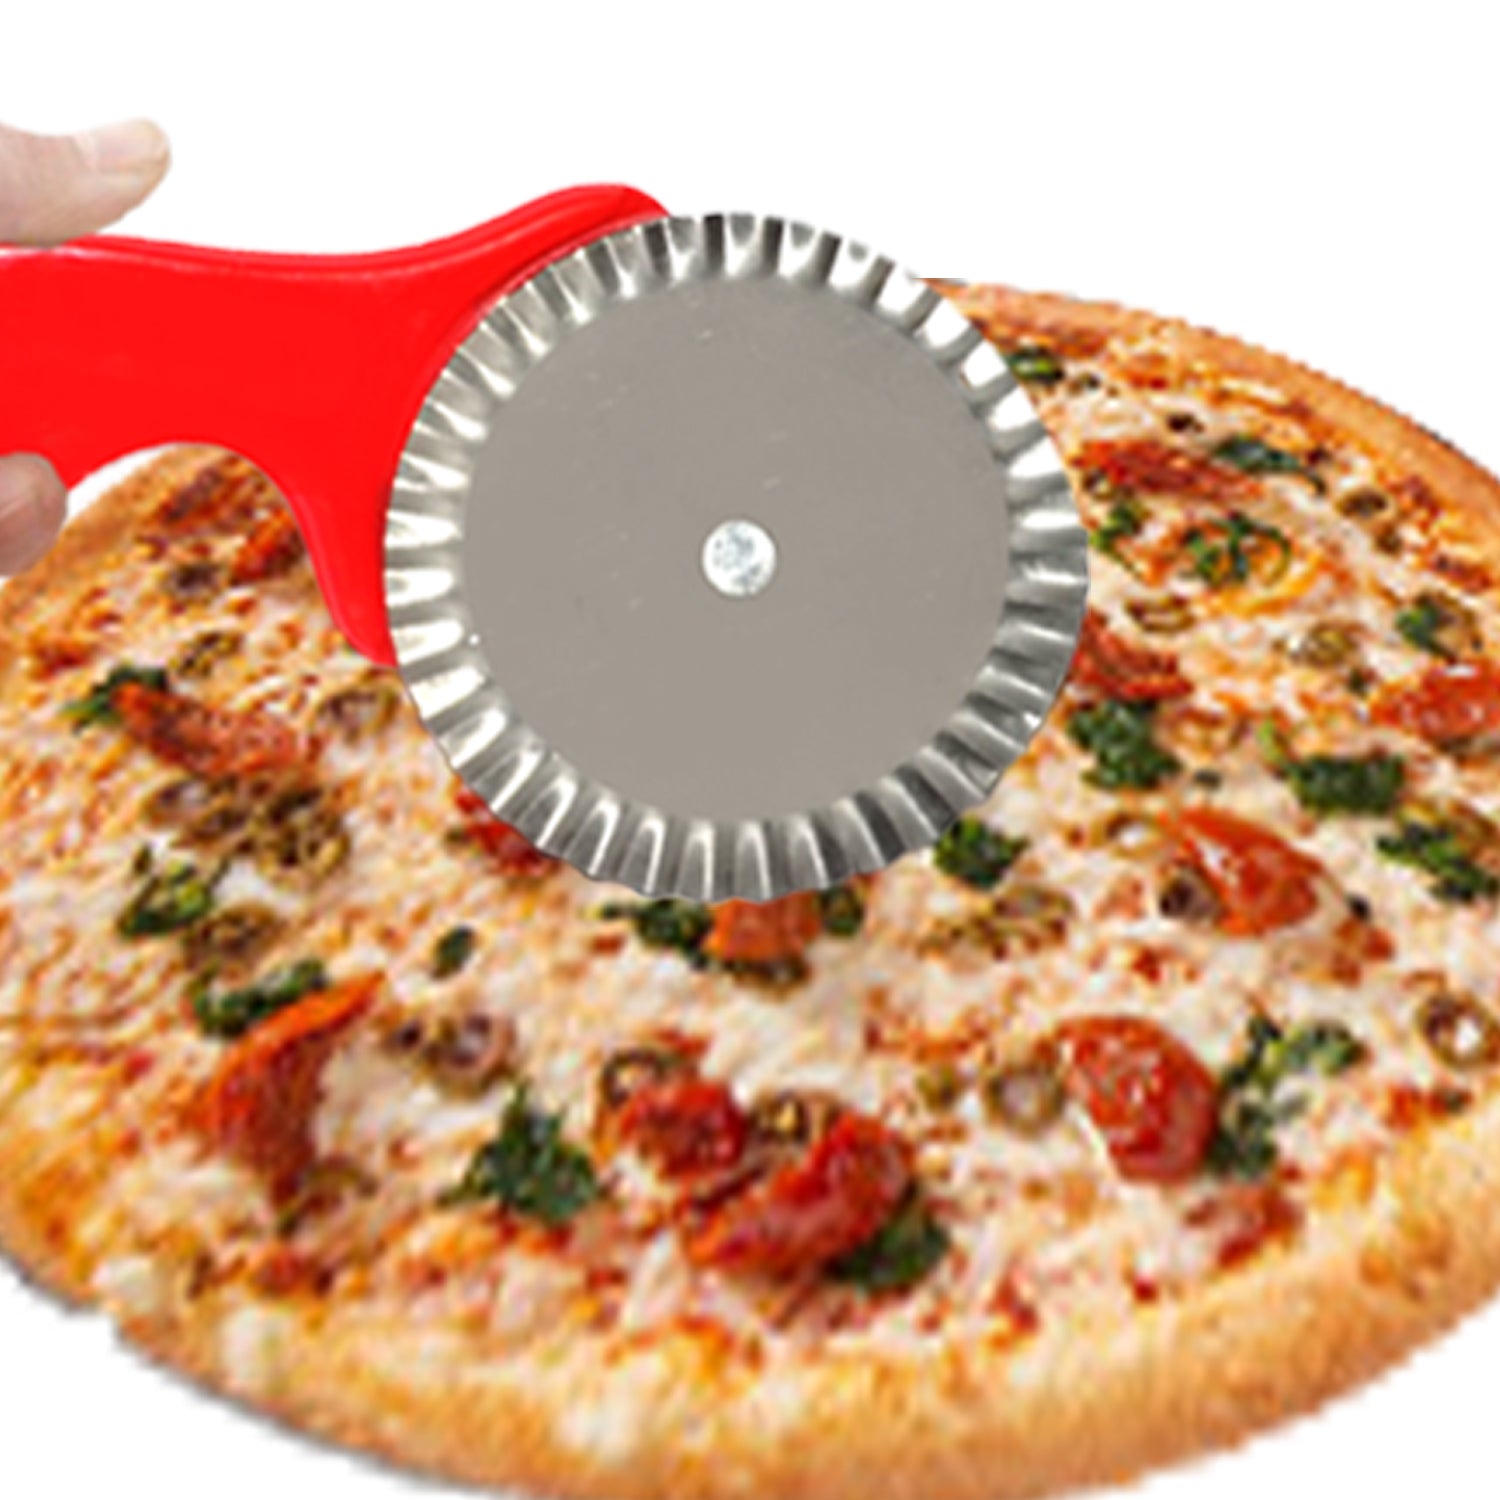 Stainless Steel Pizza Cutter/Pastry Cutter/Sandwiches Cutter